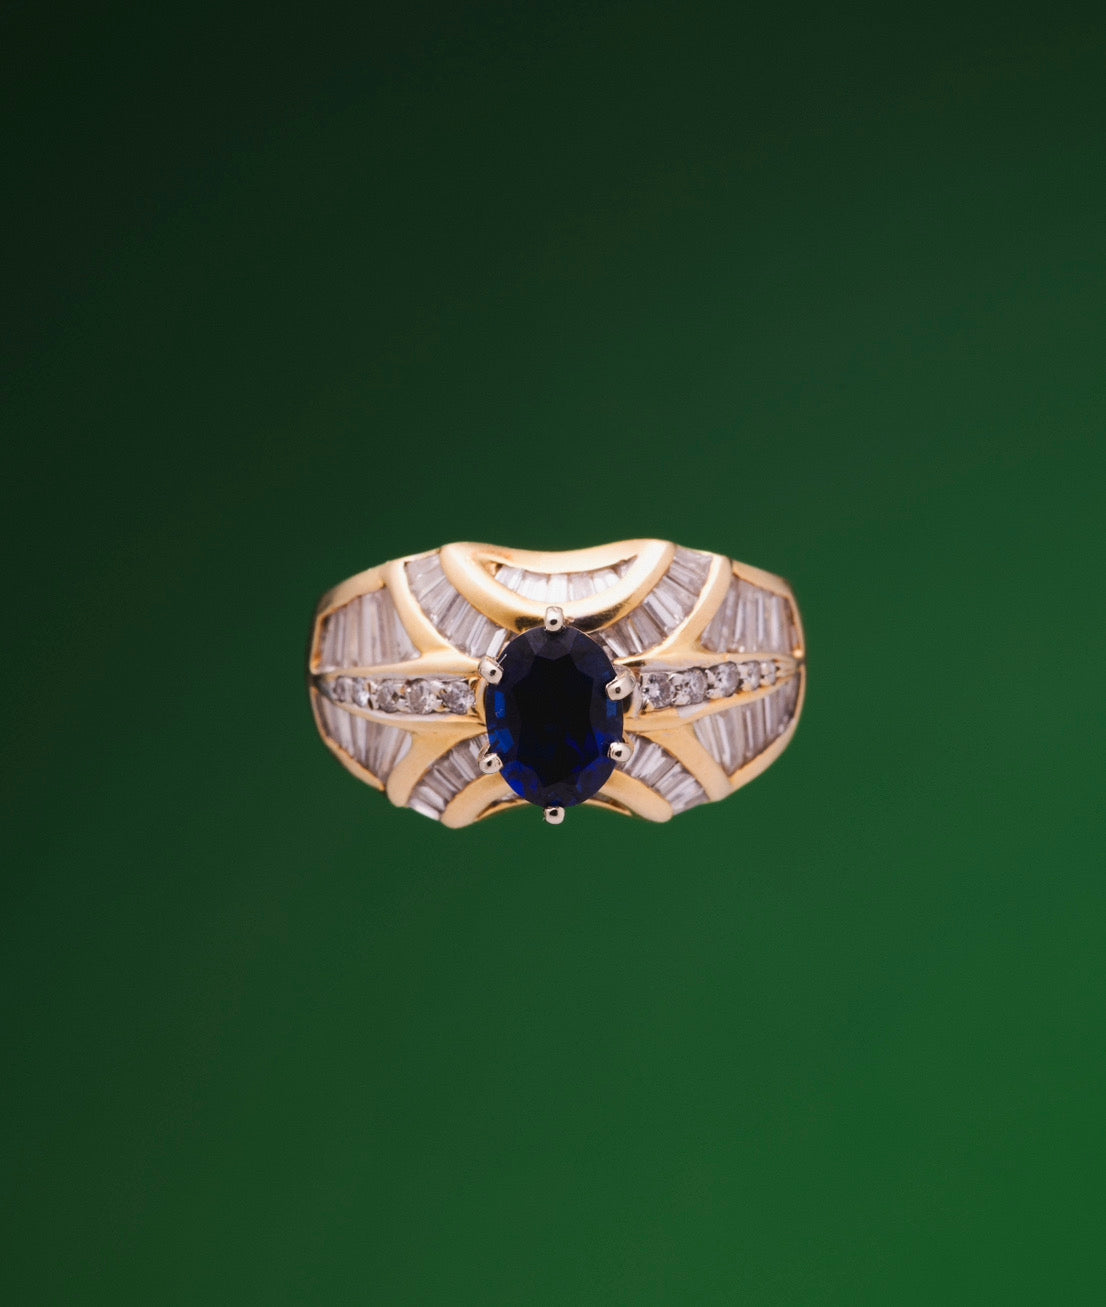 The Cocktail Sapphire Ring